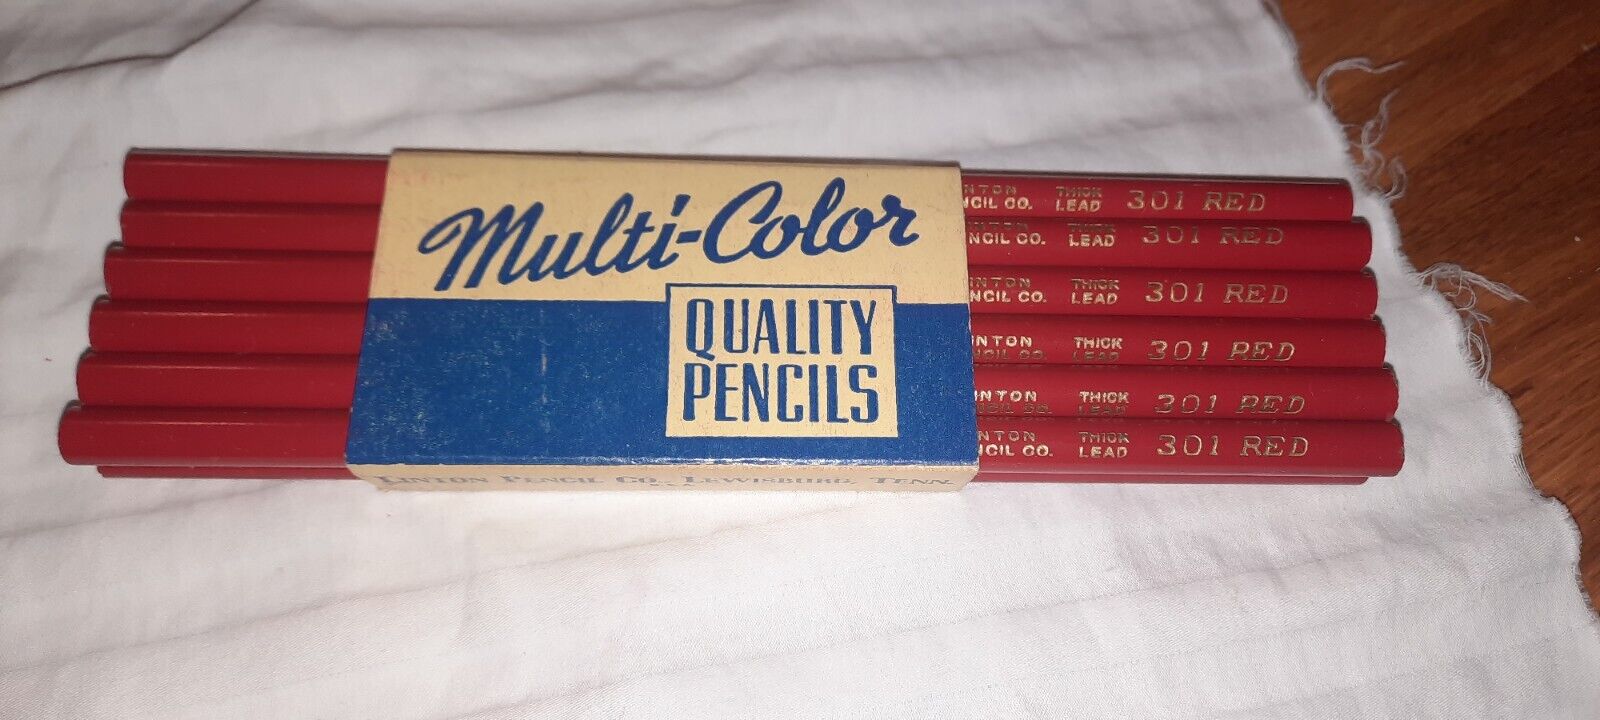  12 VINTAGE LINTON 301 RED PENCILS THICK CHECKING LEAD NOS